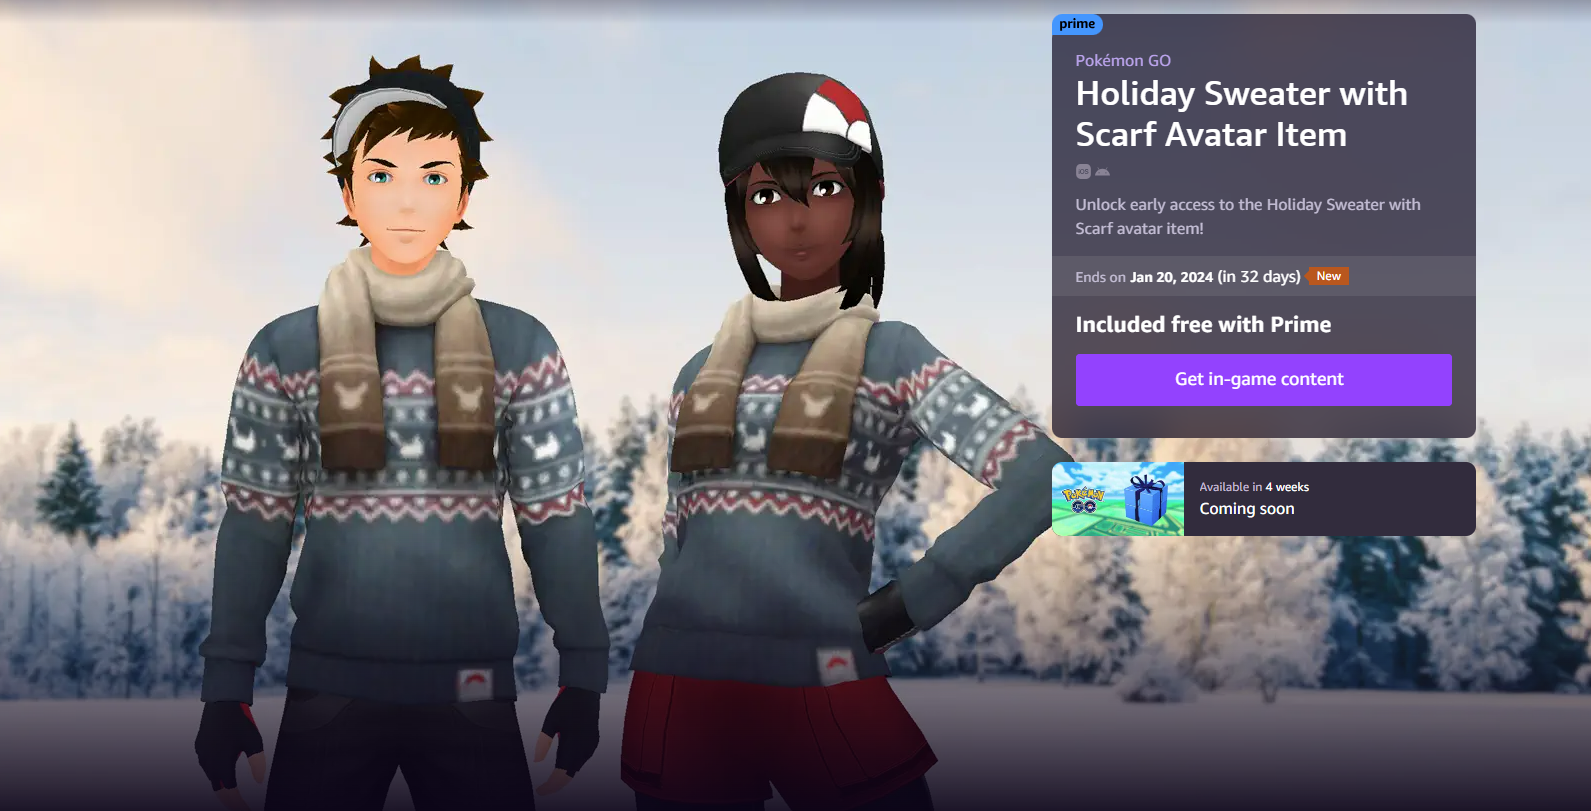 Holiday Sweater with Scarf Avatar Item in Pokemon Go on the Amazon Prime Gaming website